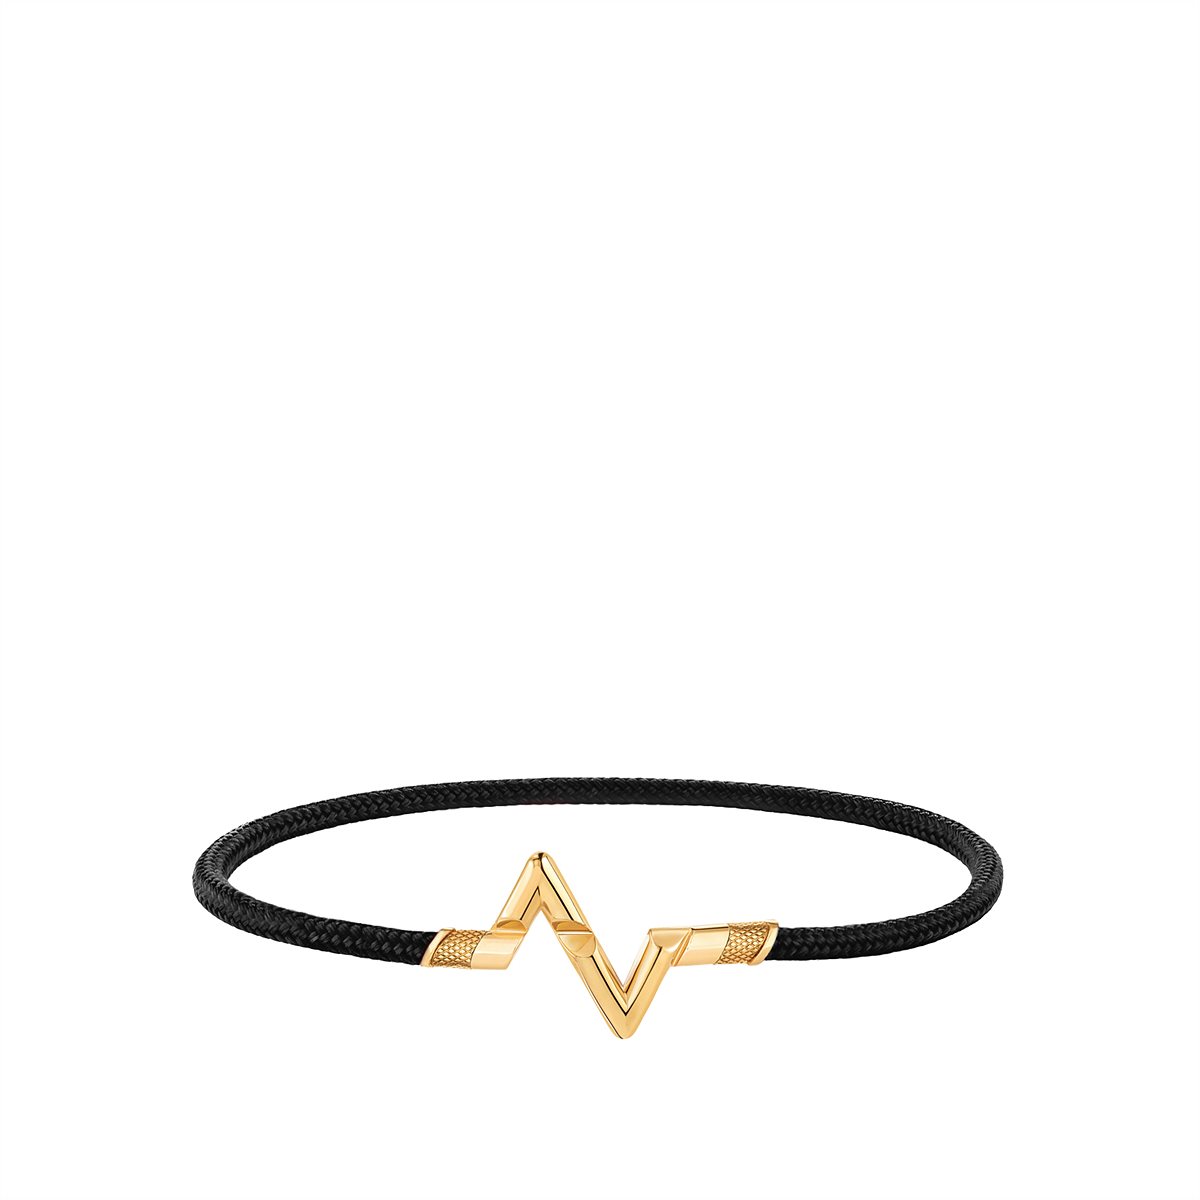 LV_LV VOLT_Play bracelet in yellow gold and jet black